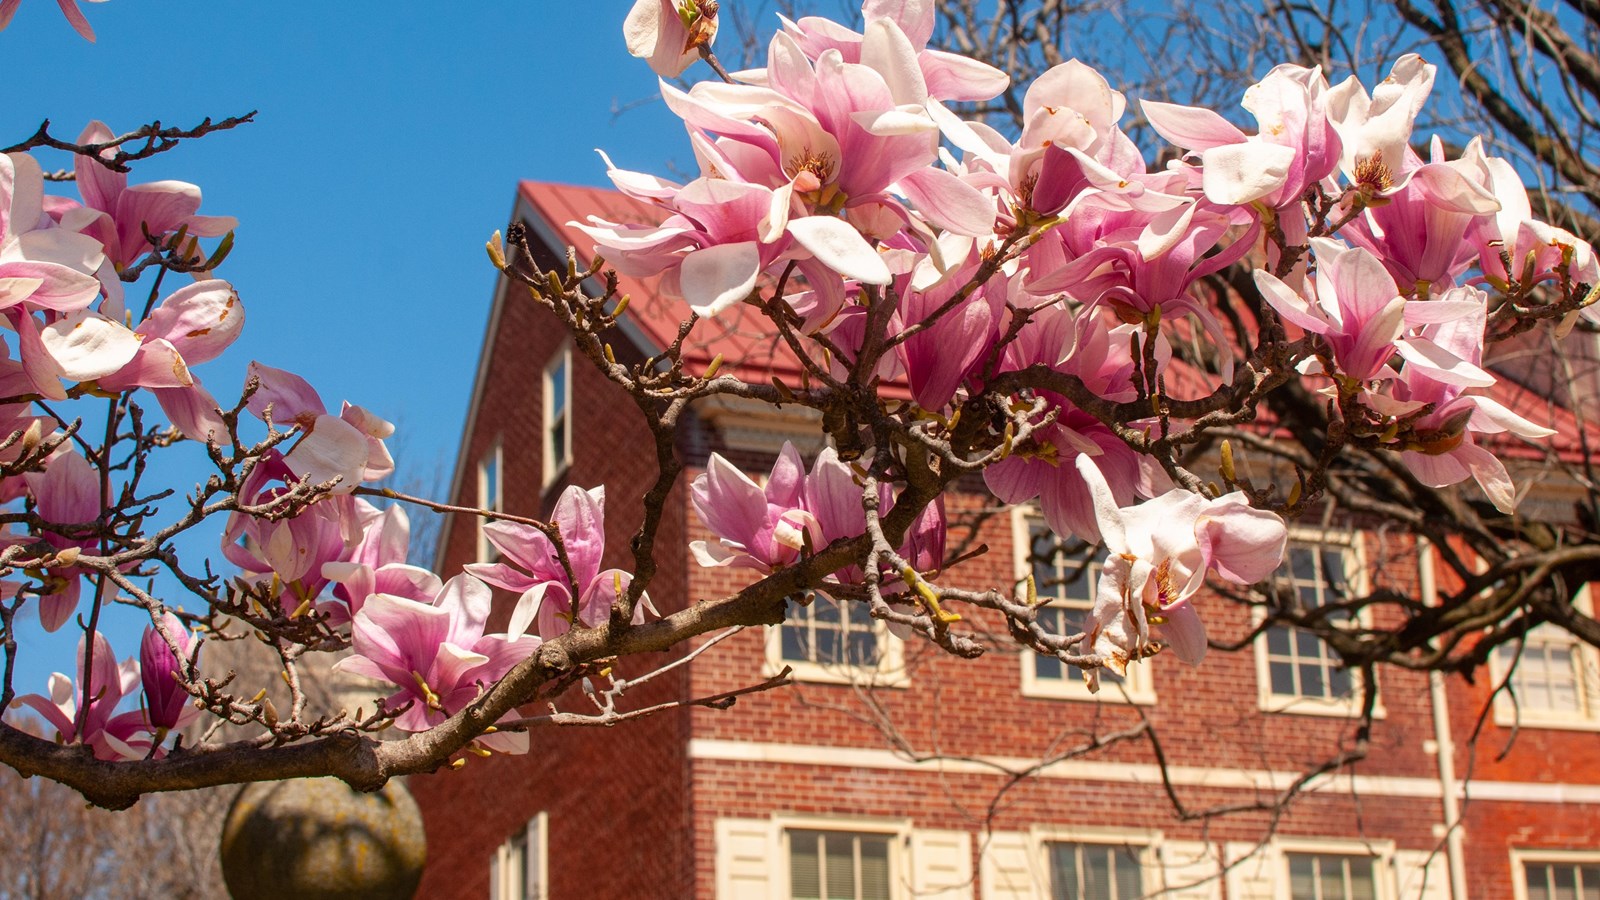 Close-up view of pink and white magnolia tree blooms against a blue sky and brick house.